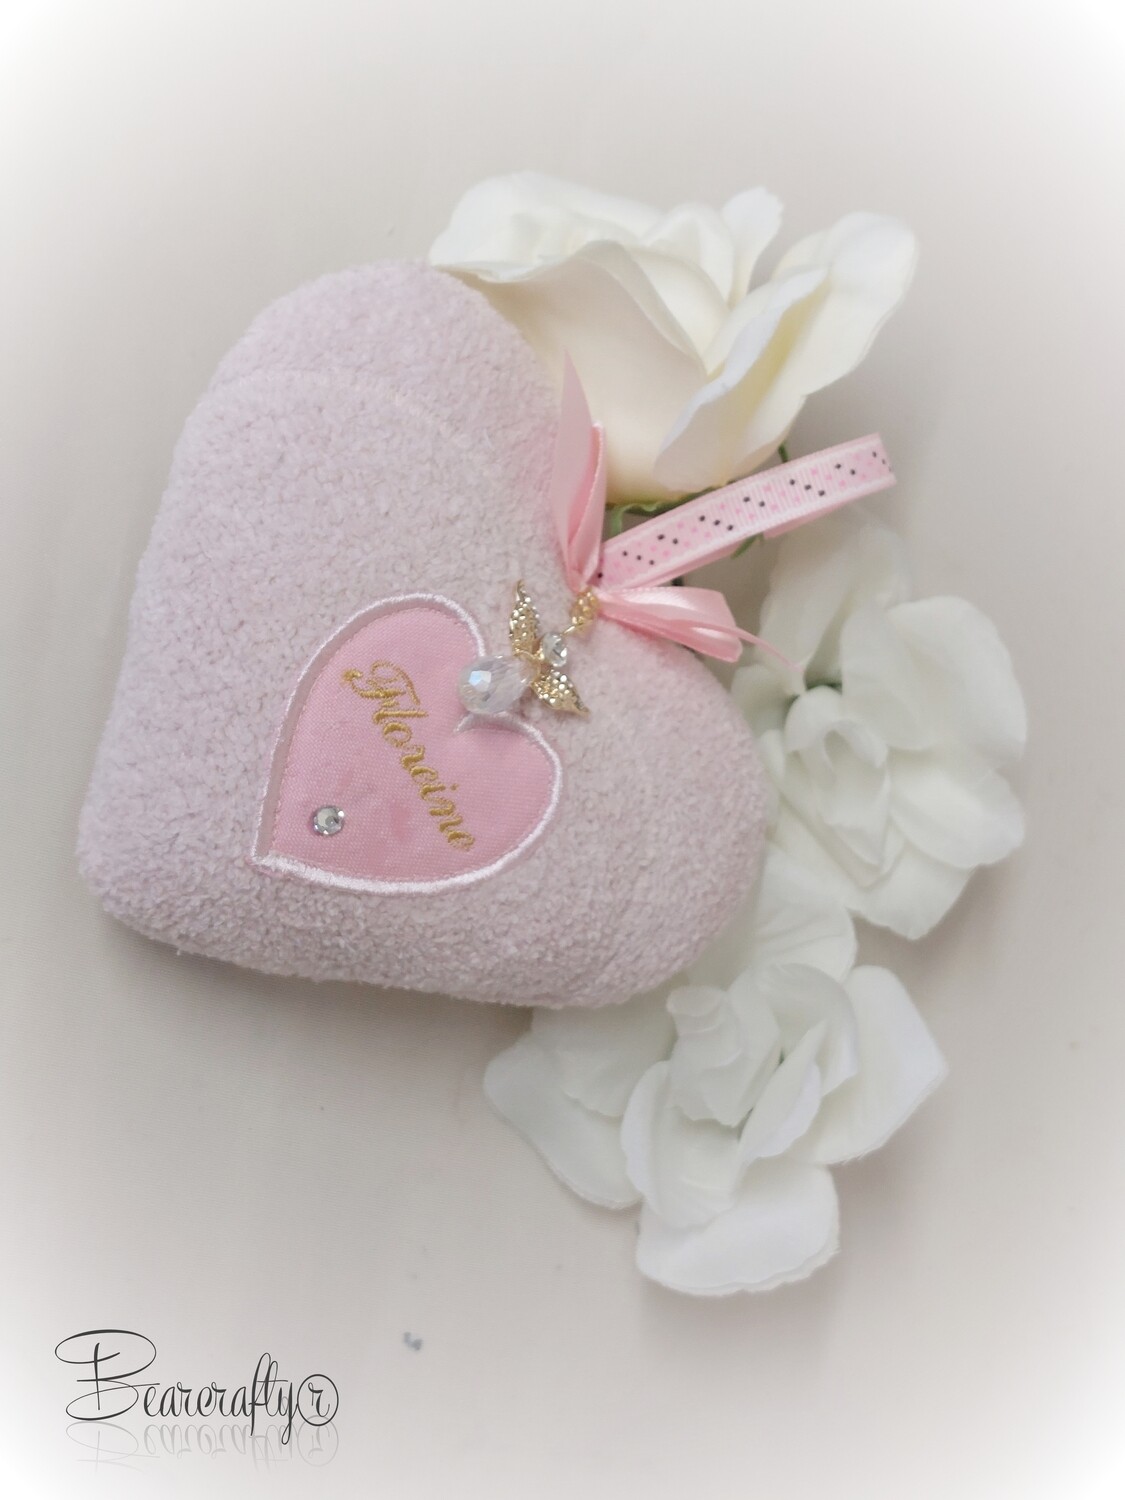 Little heart ornament with added charm or Bow